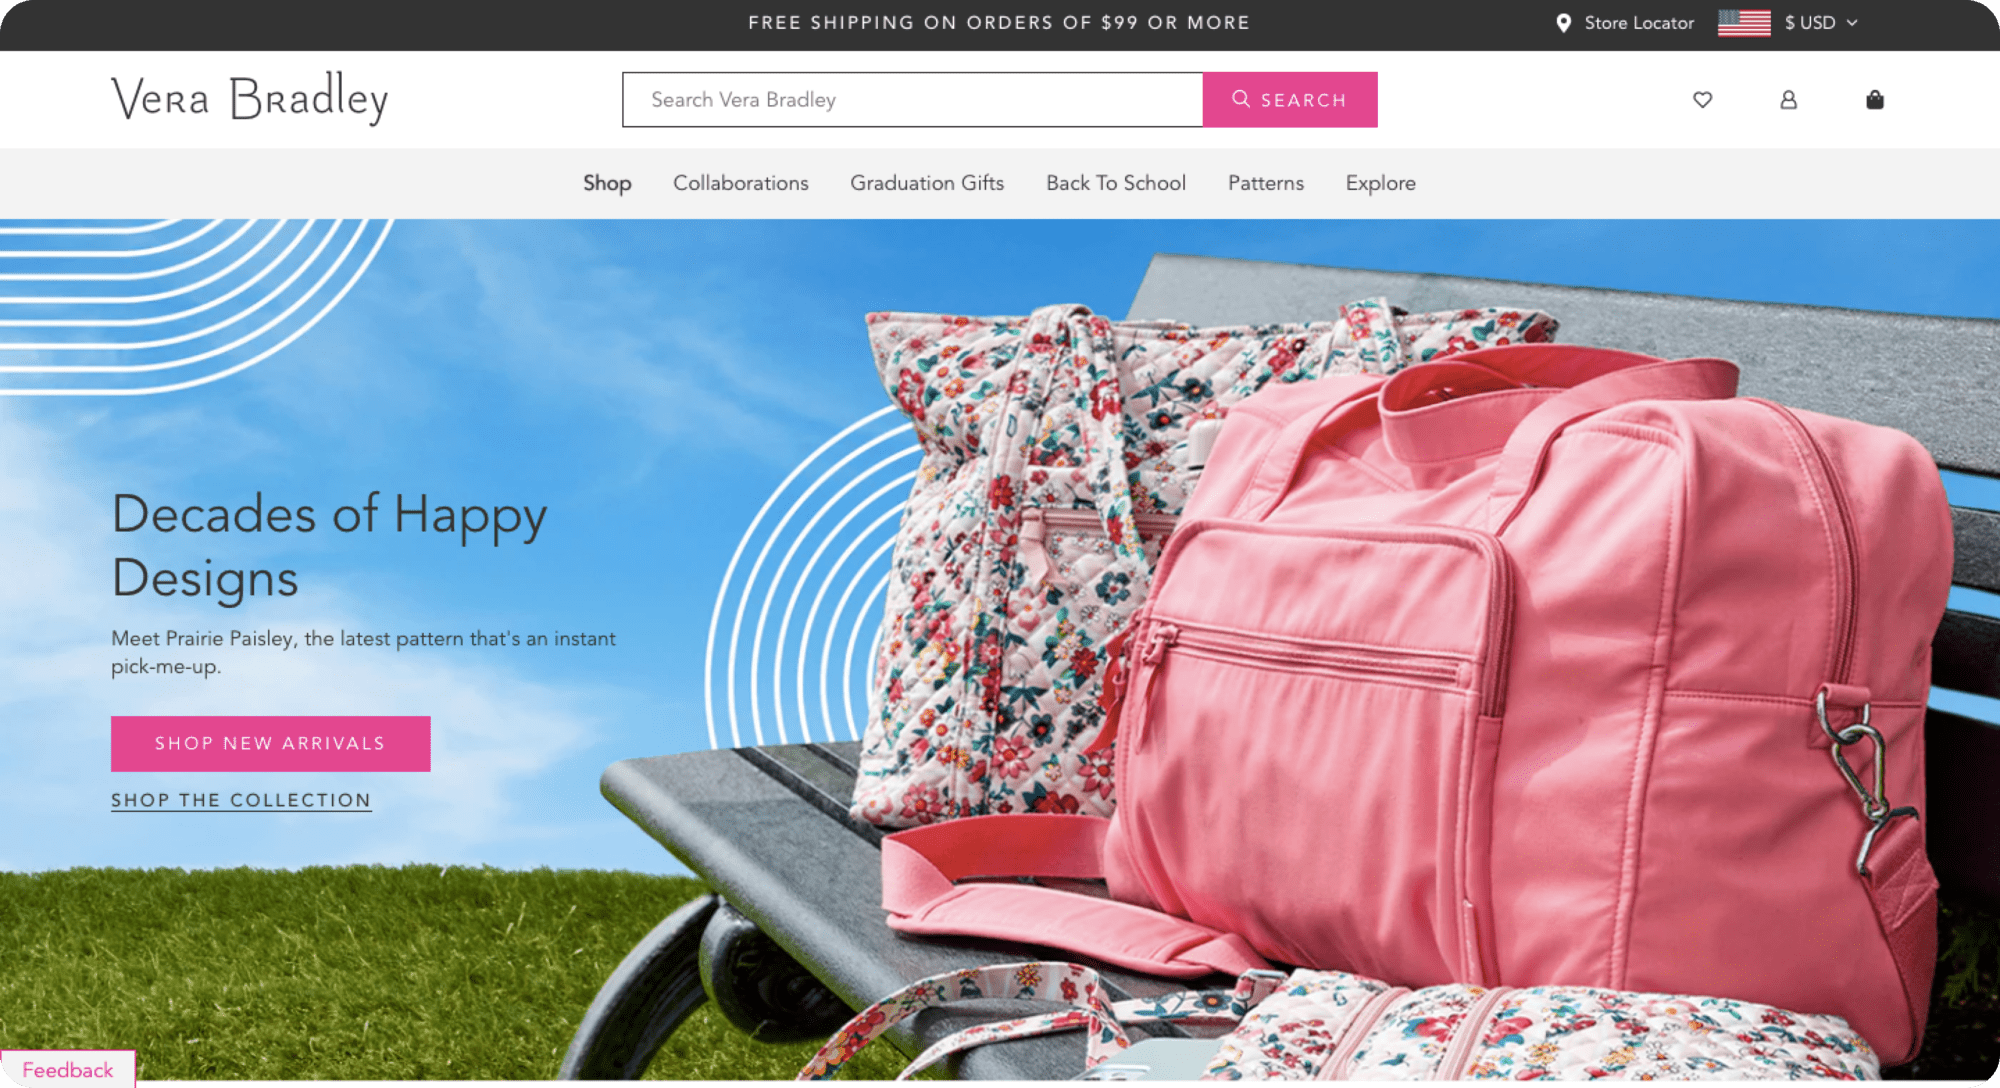 The homepage of Vera Bradley website, which was built by Shopify